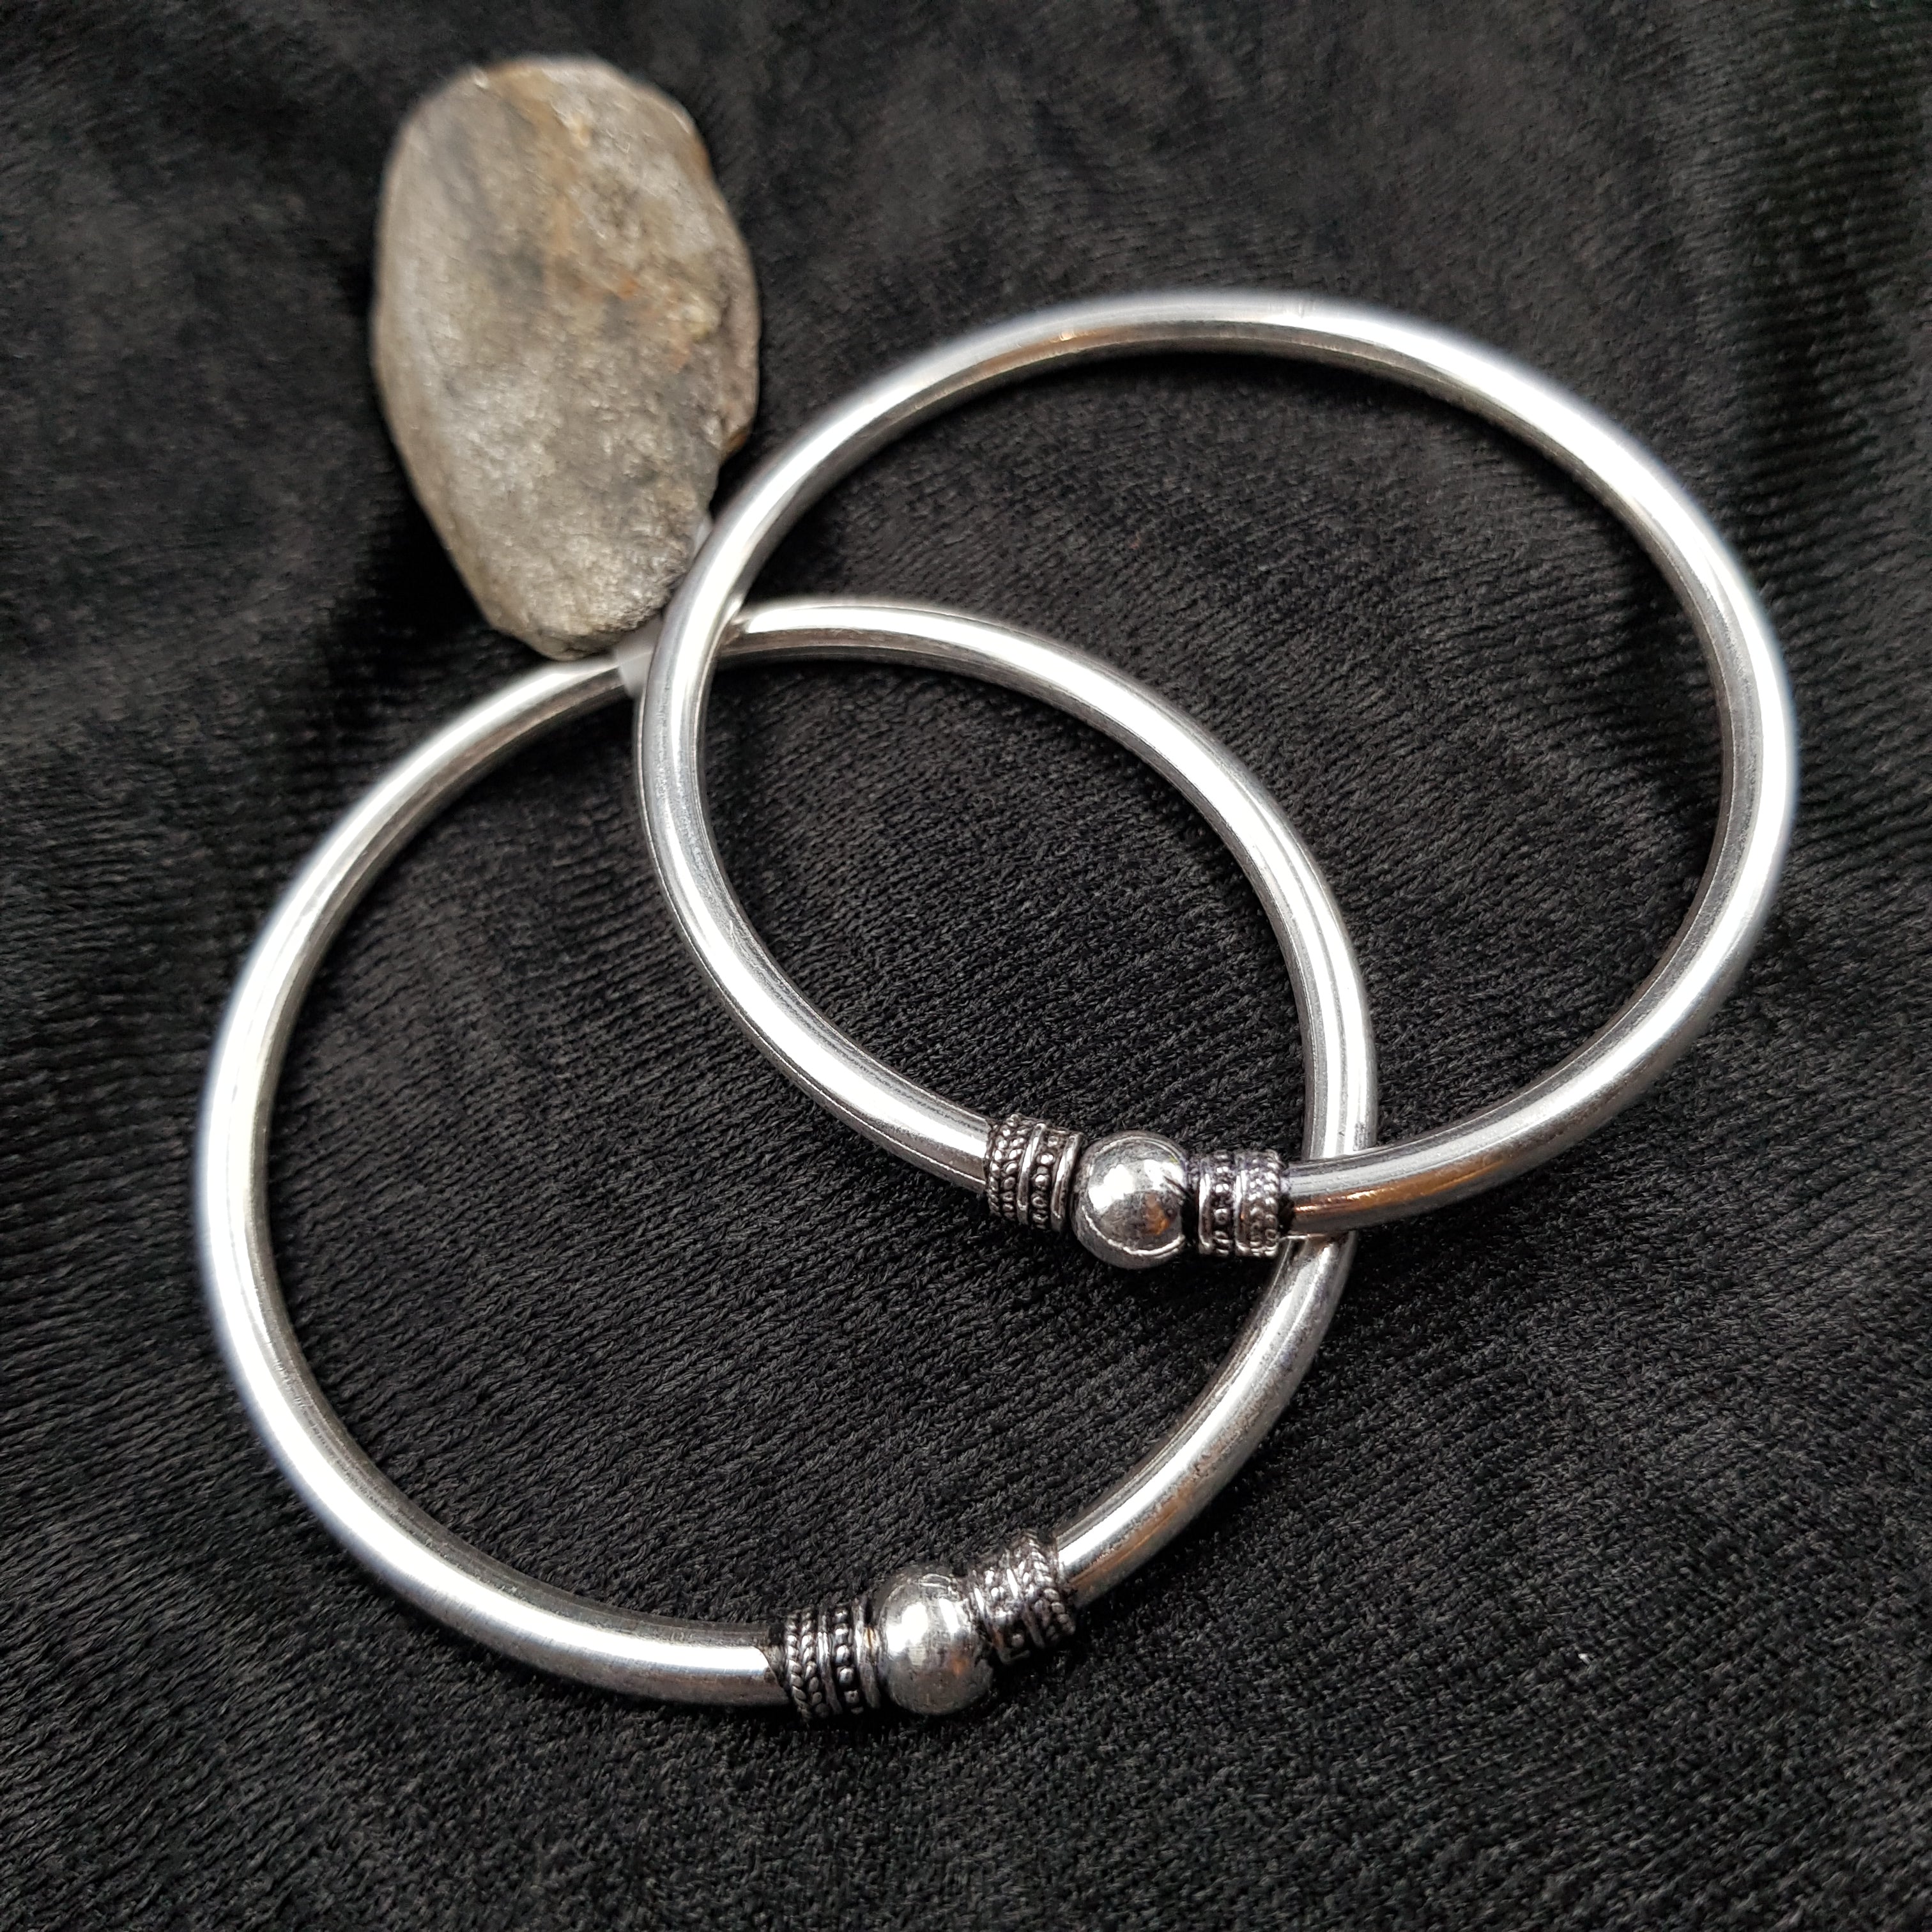 Buy Modern Silver Bangle With a Sleek and Edgy Charcoal Finish Handcrafted  With Different Gauges of Sterling Wire bundle Hoop Bracelet Online in India  - Etsy